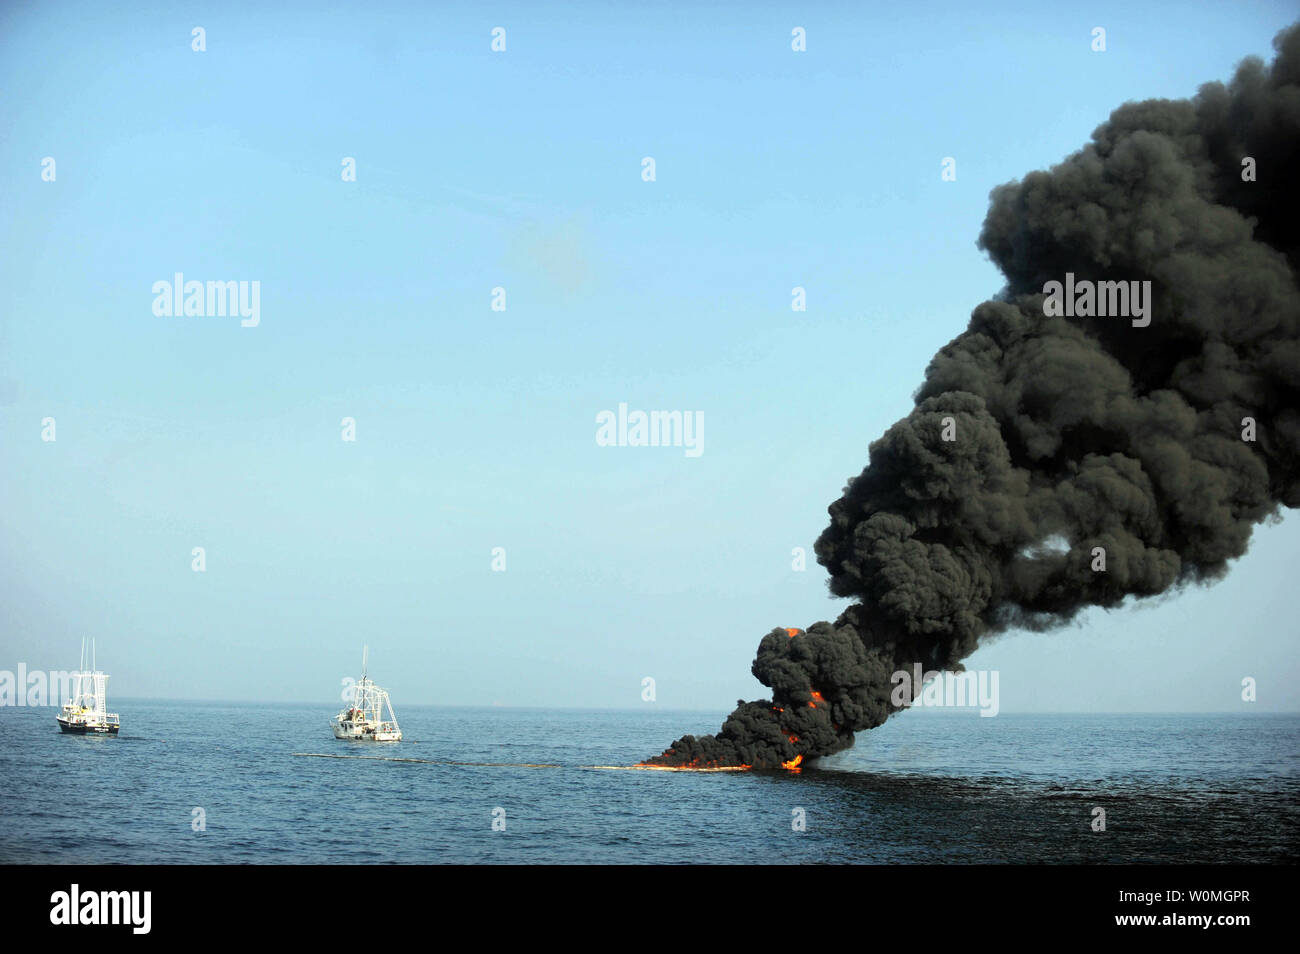 Dark clouds of smoke and fire emerge as oil burns during a controlled fire in the Gulf of Mexico on May 7, 2010. The U.S. Coast Guard working in partnership with BP PLC, local residents, and other federal agencies conducted the 'in situ burn' to aid in preventing the spread of oil following the April 20 explosion on Mobile Offshore Drilling Unit Deepwater Horizon.   UPI/Justin Stumberg/US Navy. Stock Photo